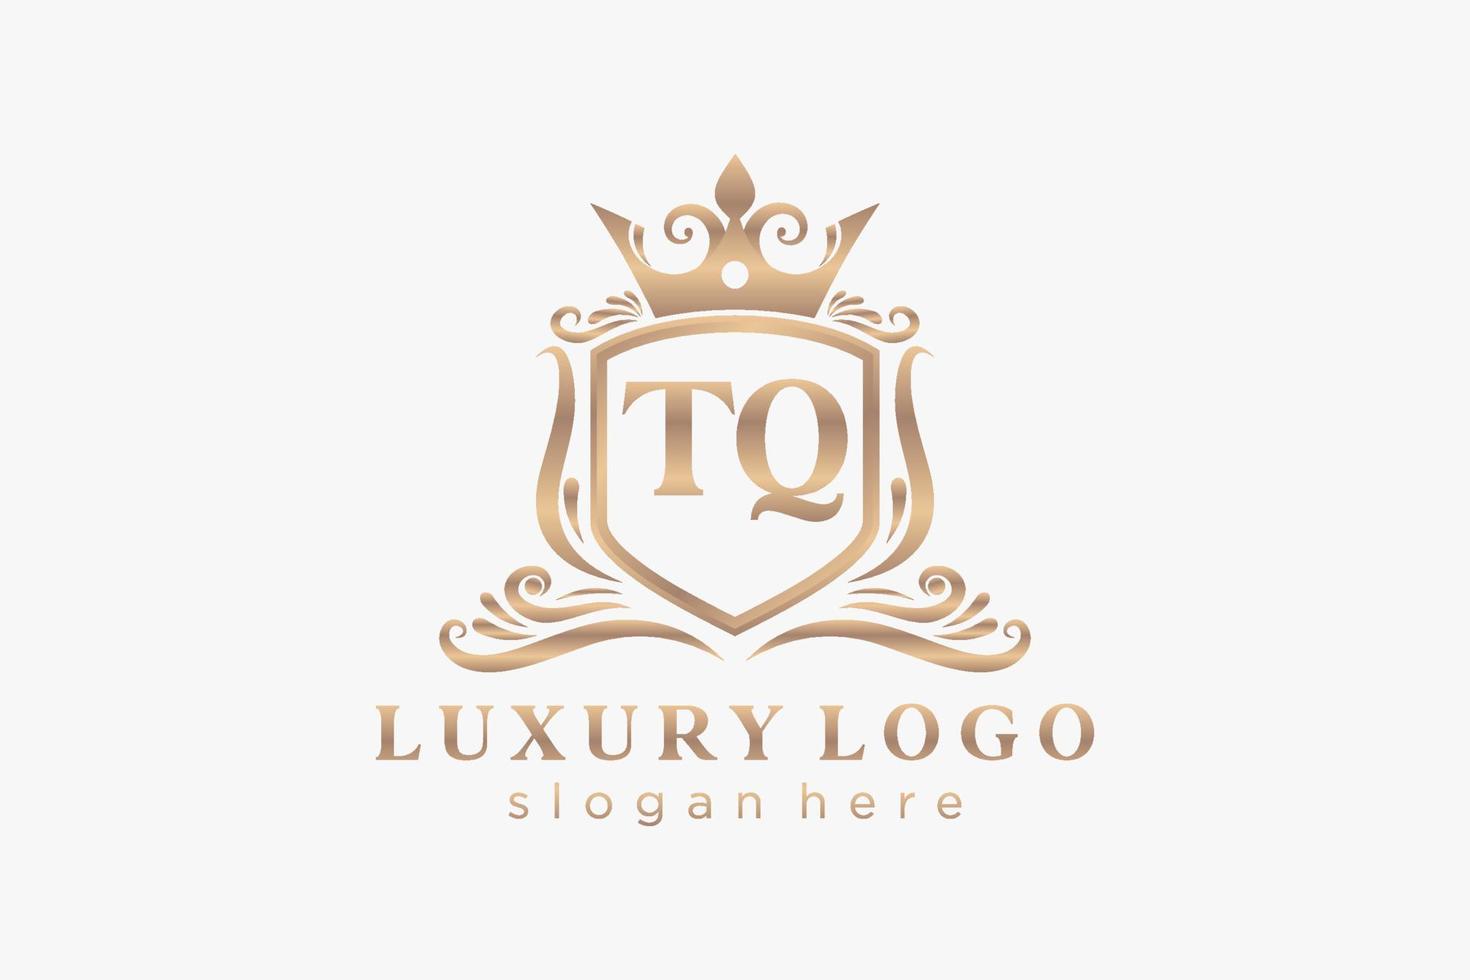 Initial TQ Letter Royal Luxury Logo template in vector art for Restaurant, Royalty, Boutique, Cafe, Hotel, Heraldic, Jewelry, Fashion and other vector illustration.